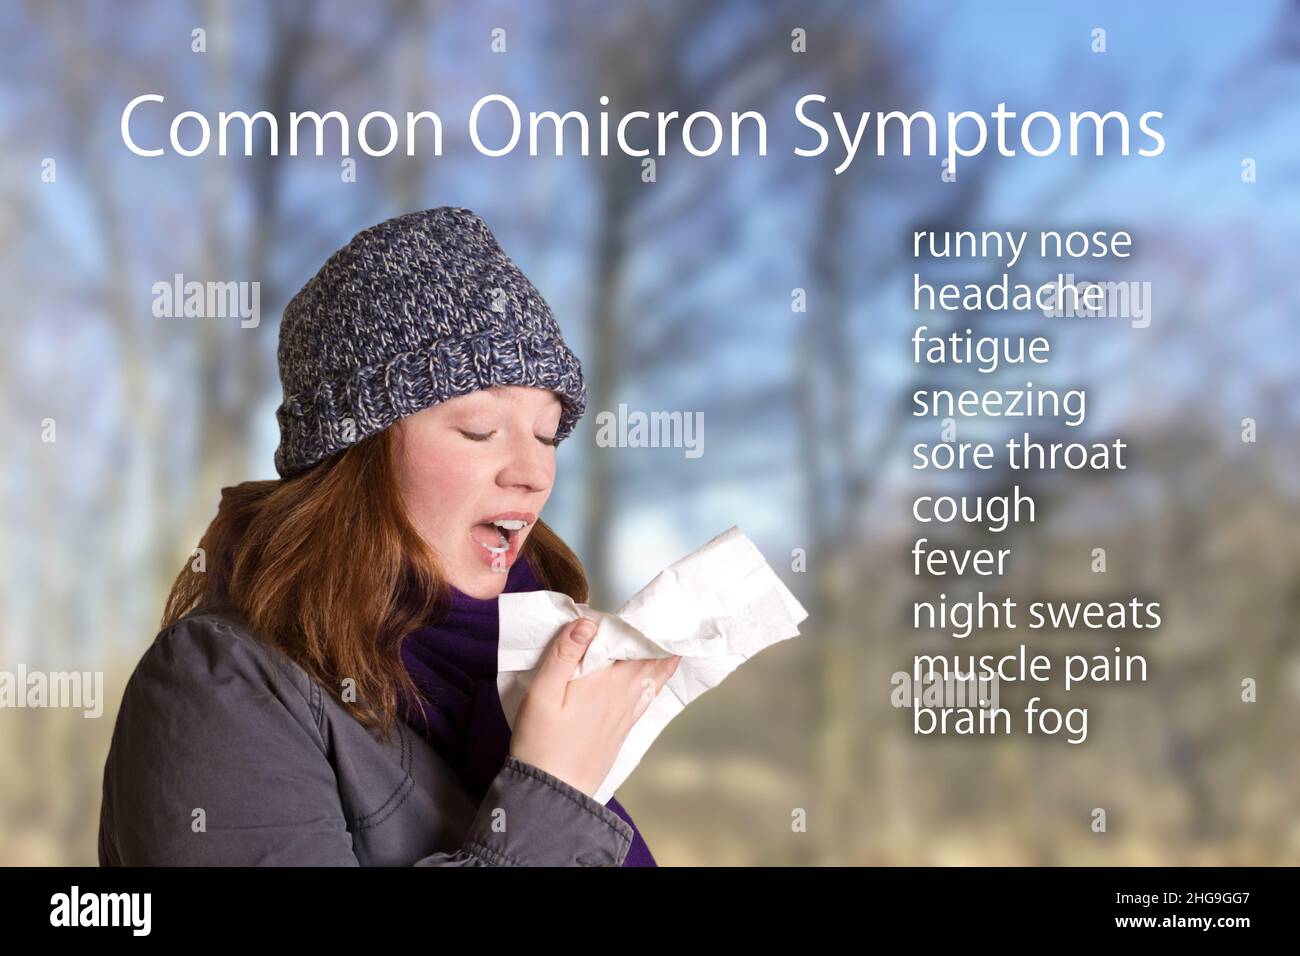 Common symptoms of the covid variant omicron, like runny nose, headache, fatigue and sore throat, text beside a portrait of a young woman sneezing. Stock Photo